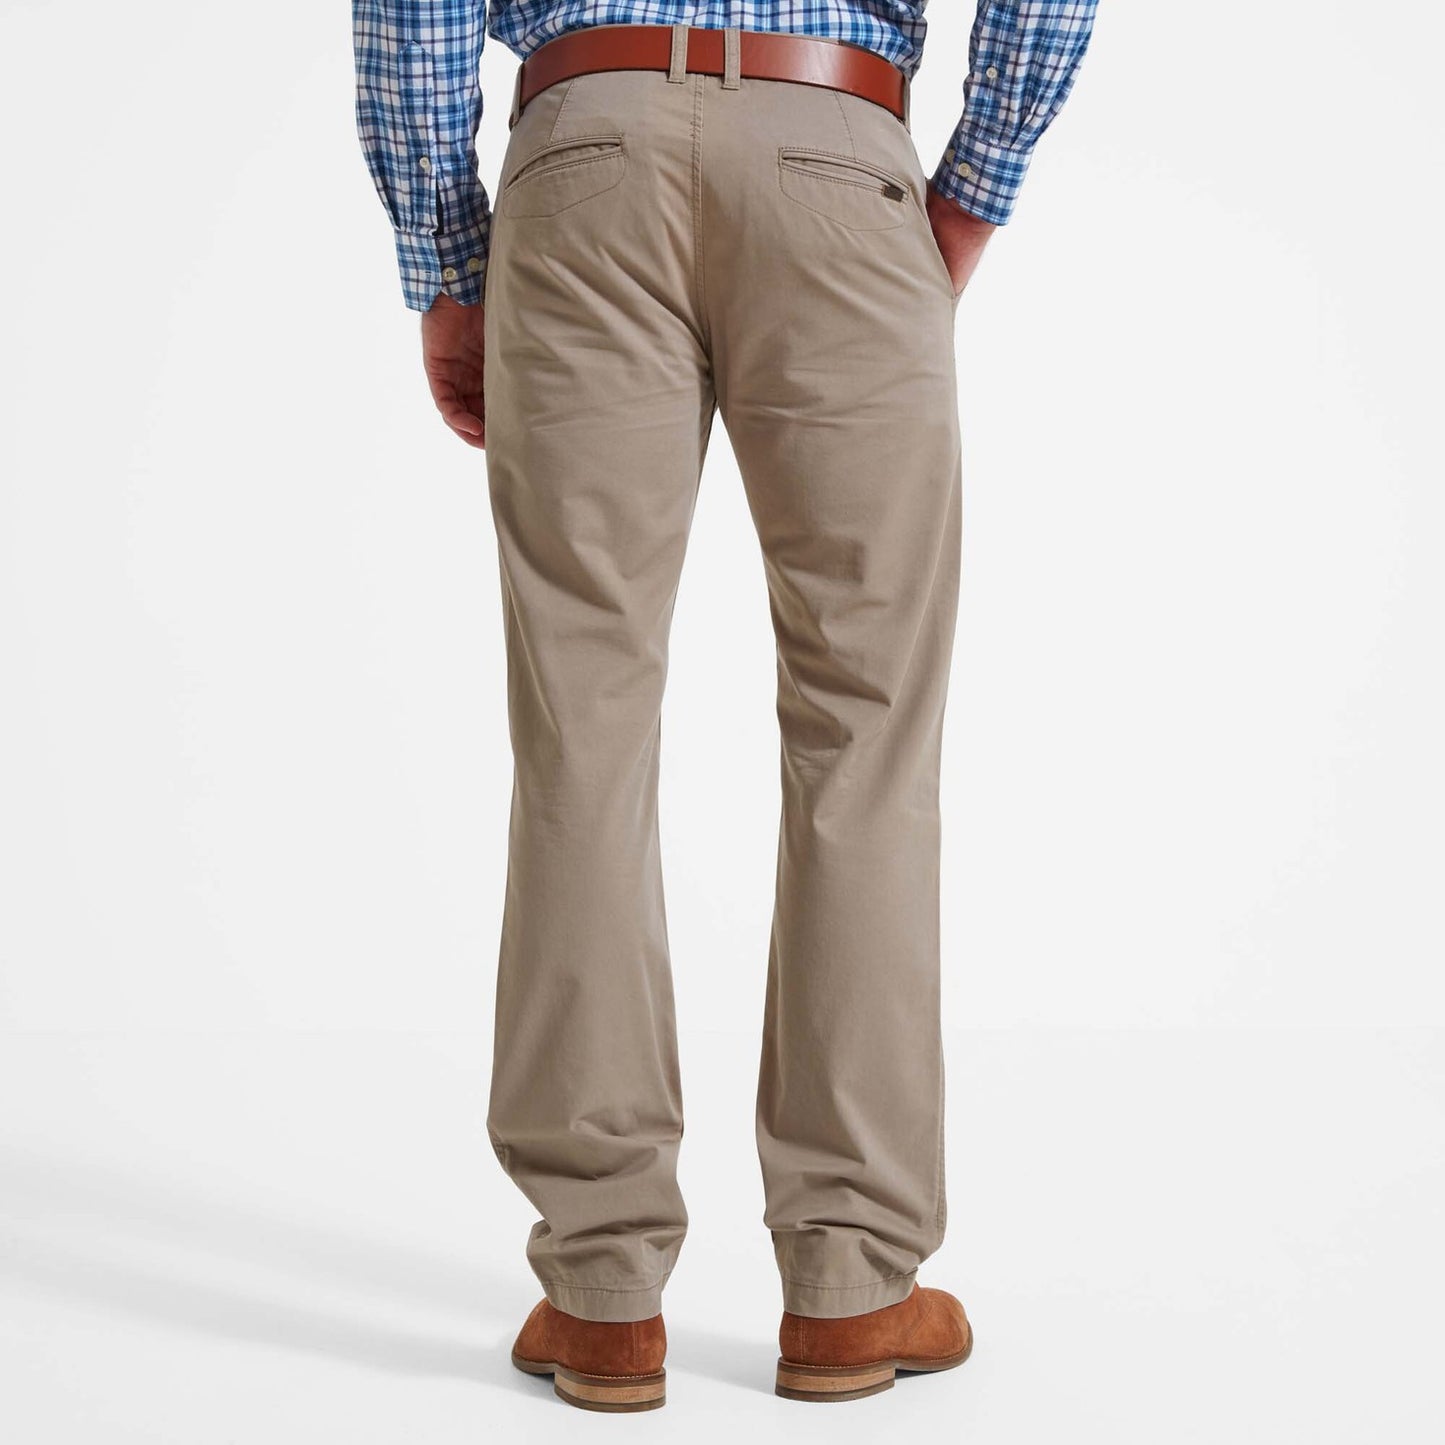 Schoffel Chinos, the Christopher Chino